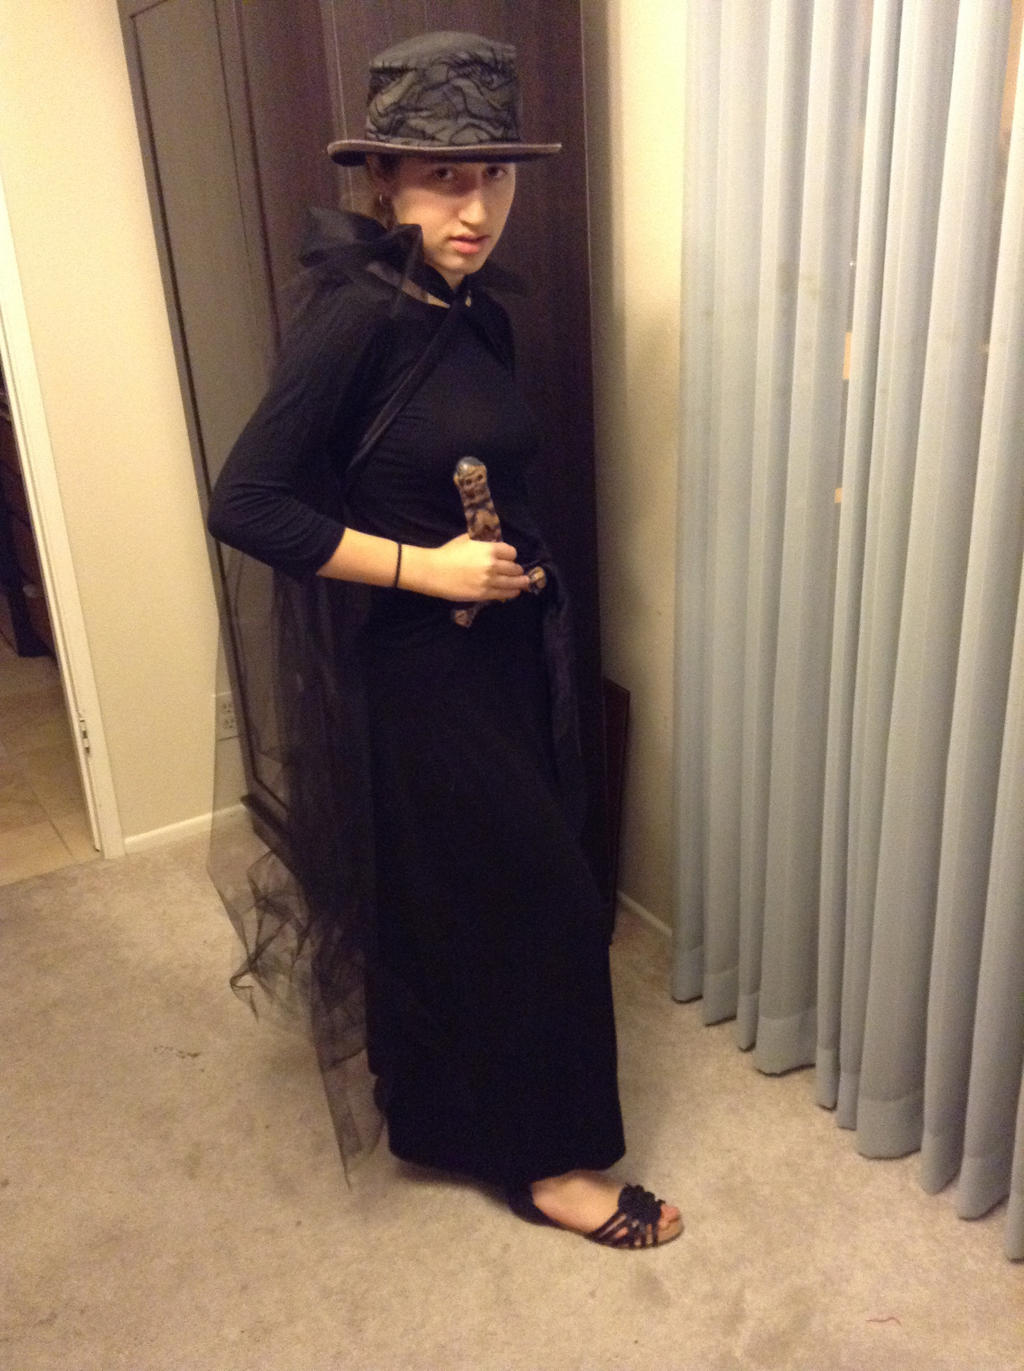 Cosplaying as Vin from Mistborn